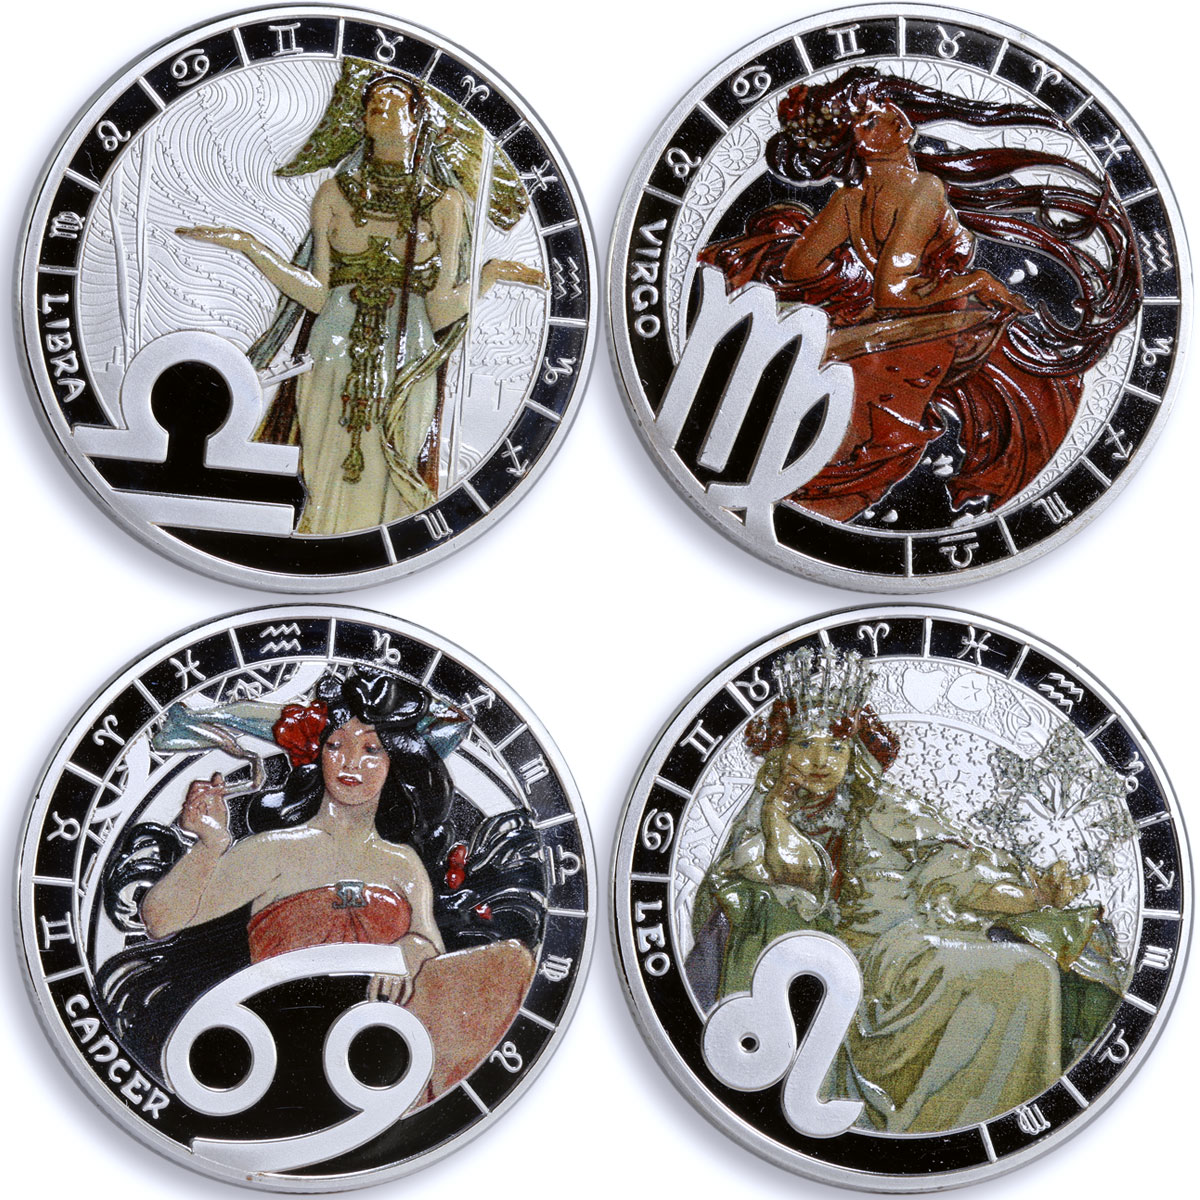 Cameroon set of 12 coins Zodiac Signs by A. Mucha colored AgBrass coins 2020